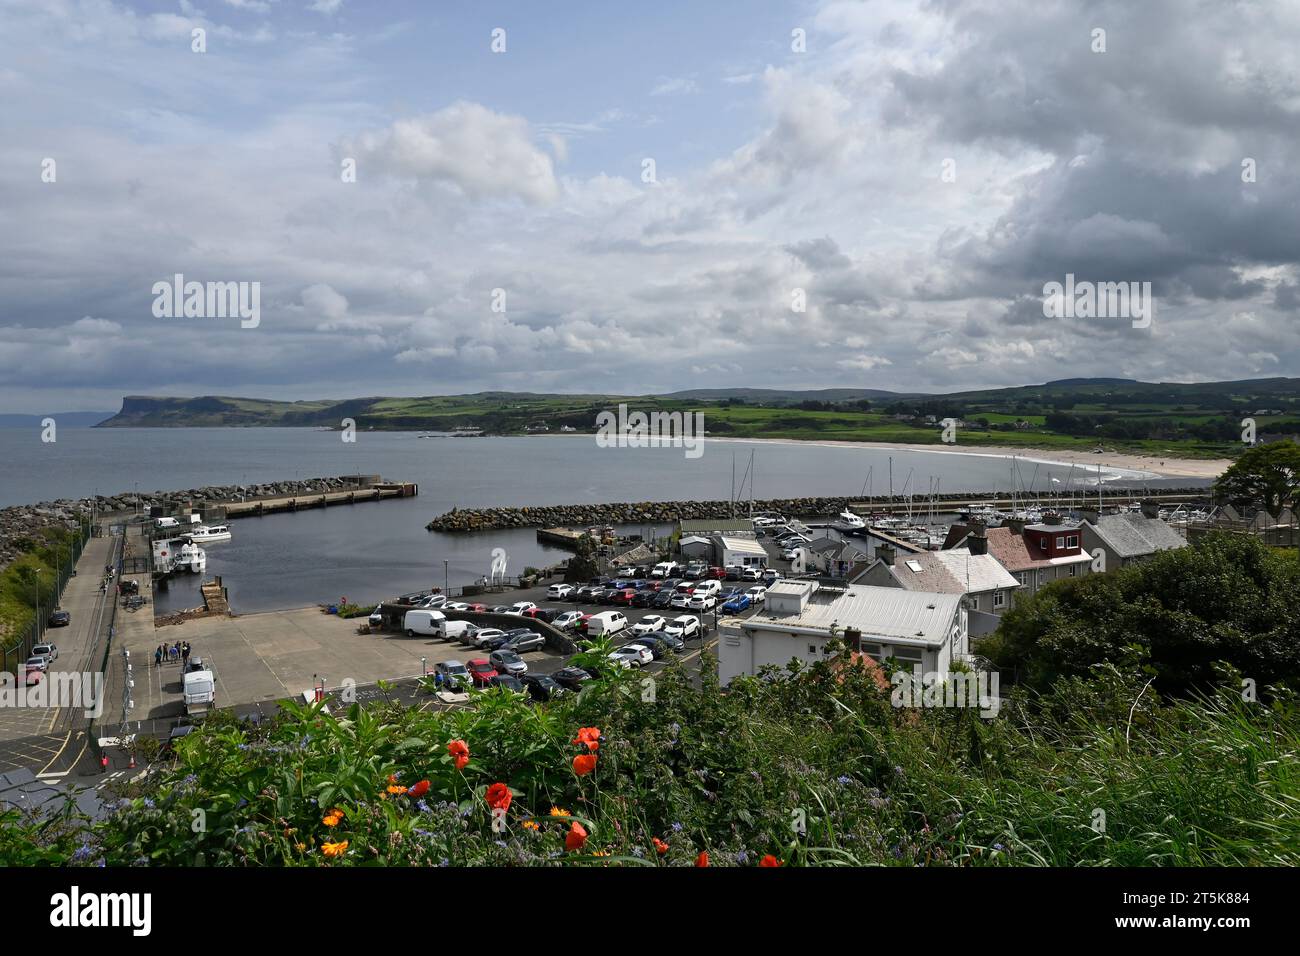 A clifftop view of Ballycastle and is Harbour in County Antrim Northern Ireland Stock Photo